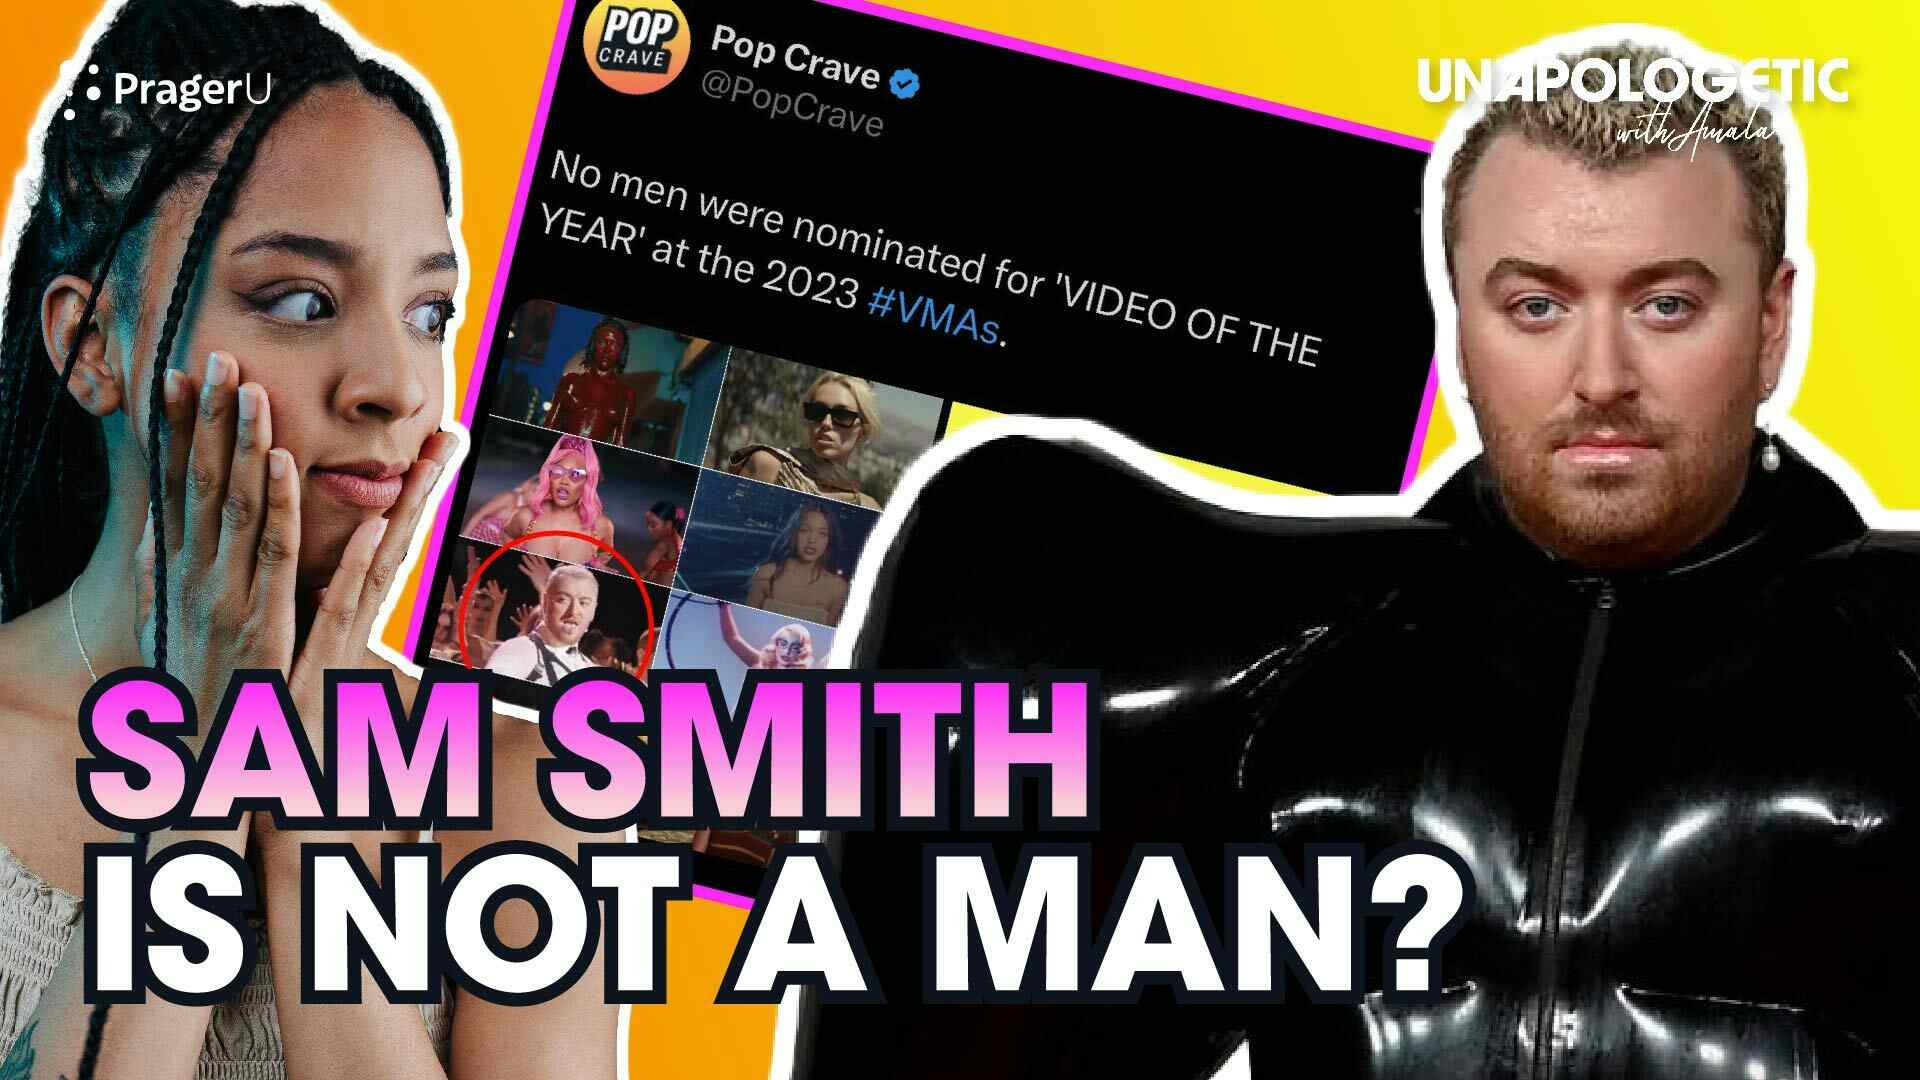 Apparently, Sam Smith Is Not a Man